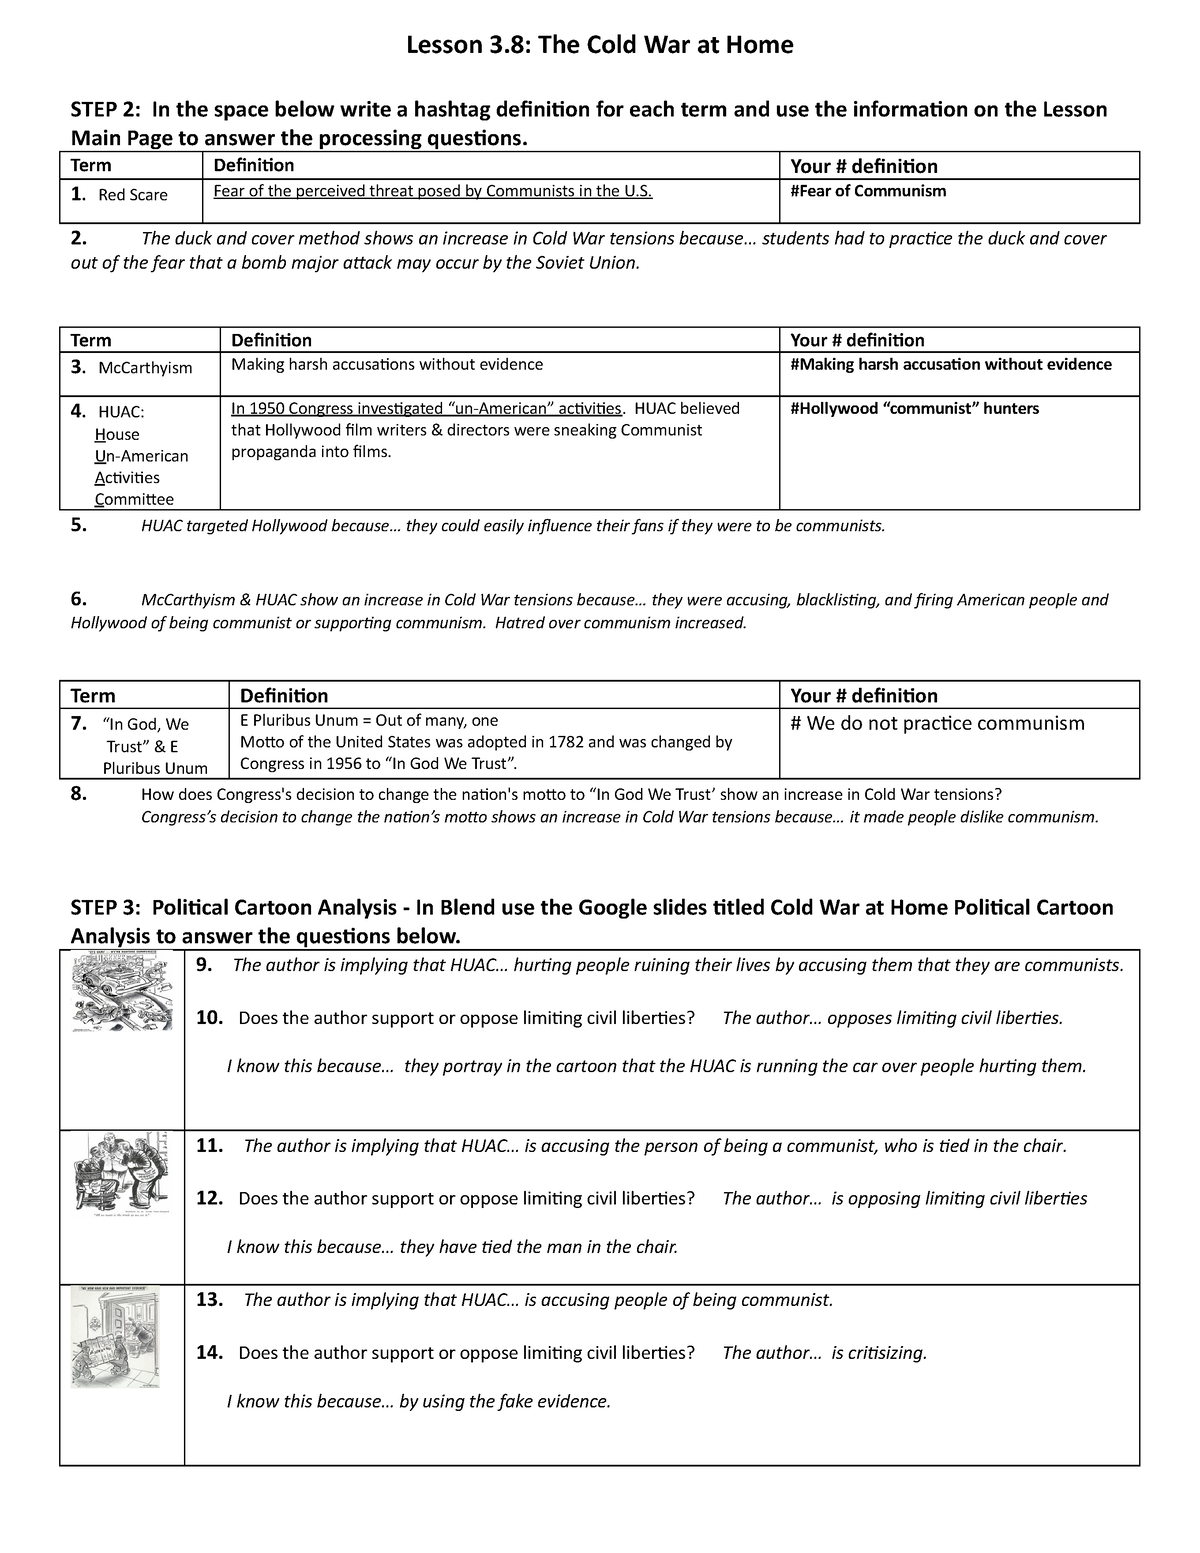 Copy of Lesson 3 8 Cold War at Home Lesson Worksheet 21 22 Lesson 3